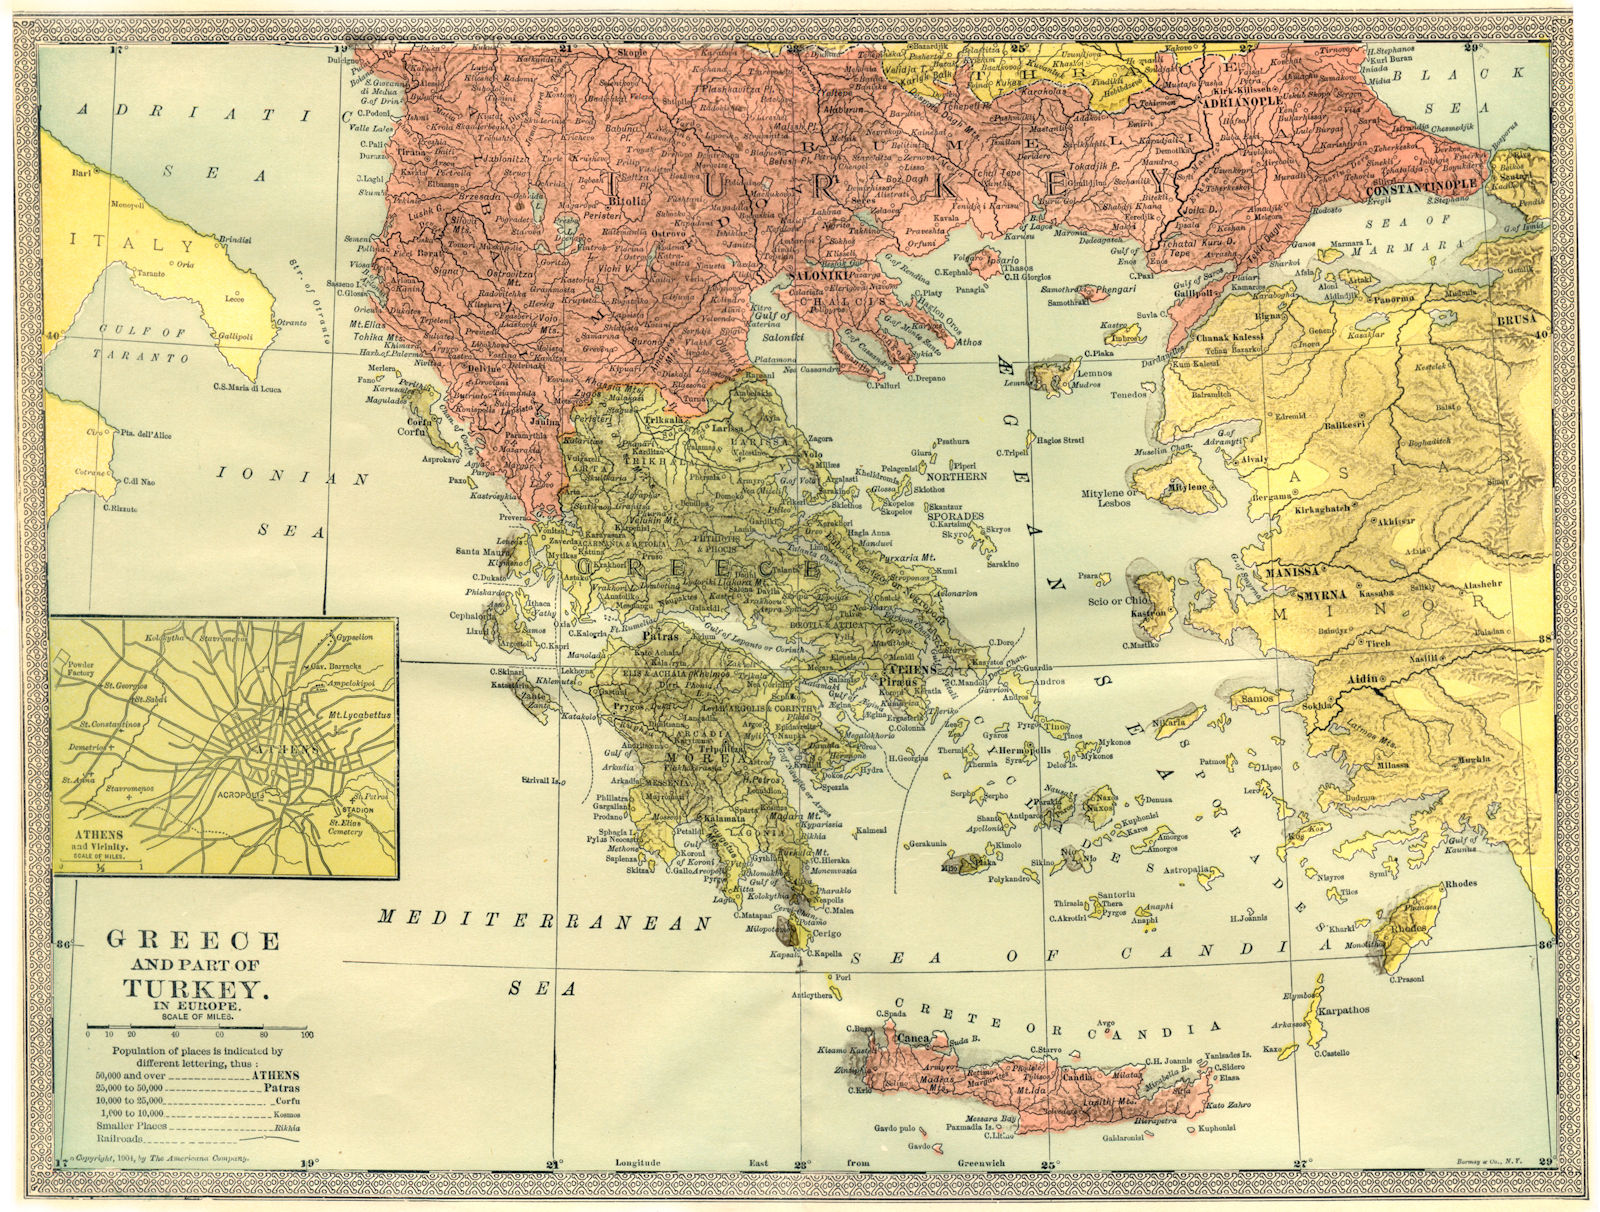 'Greece and part of Turkey in Europe'. Turkish Crete. Athens inset 1907 map